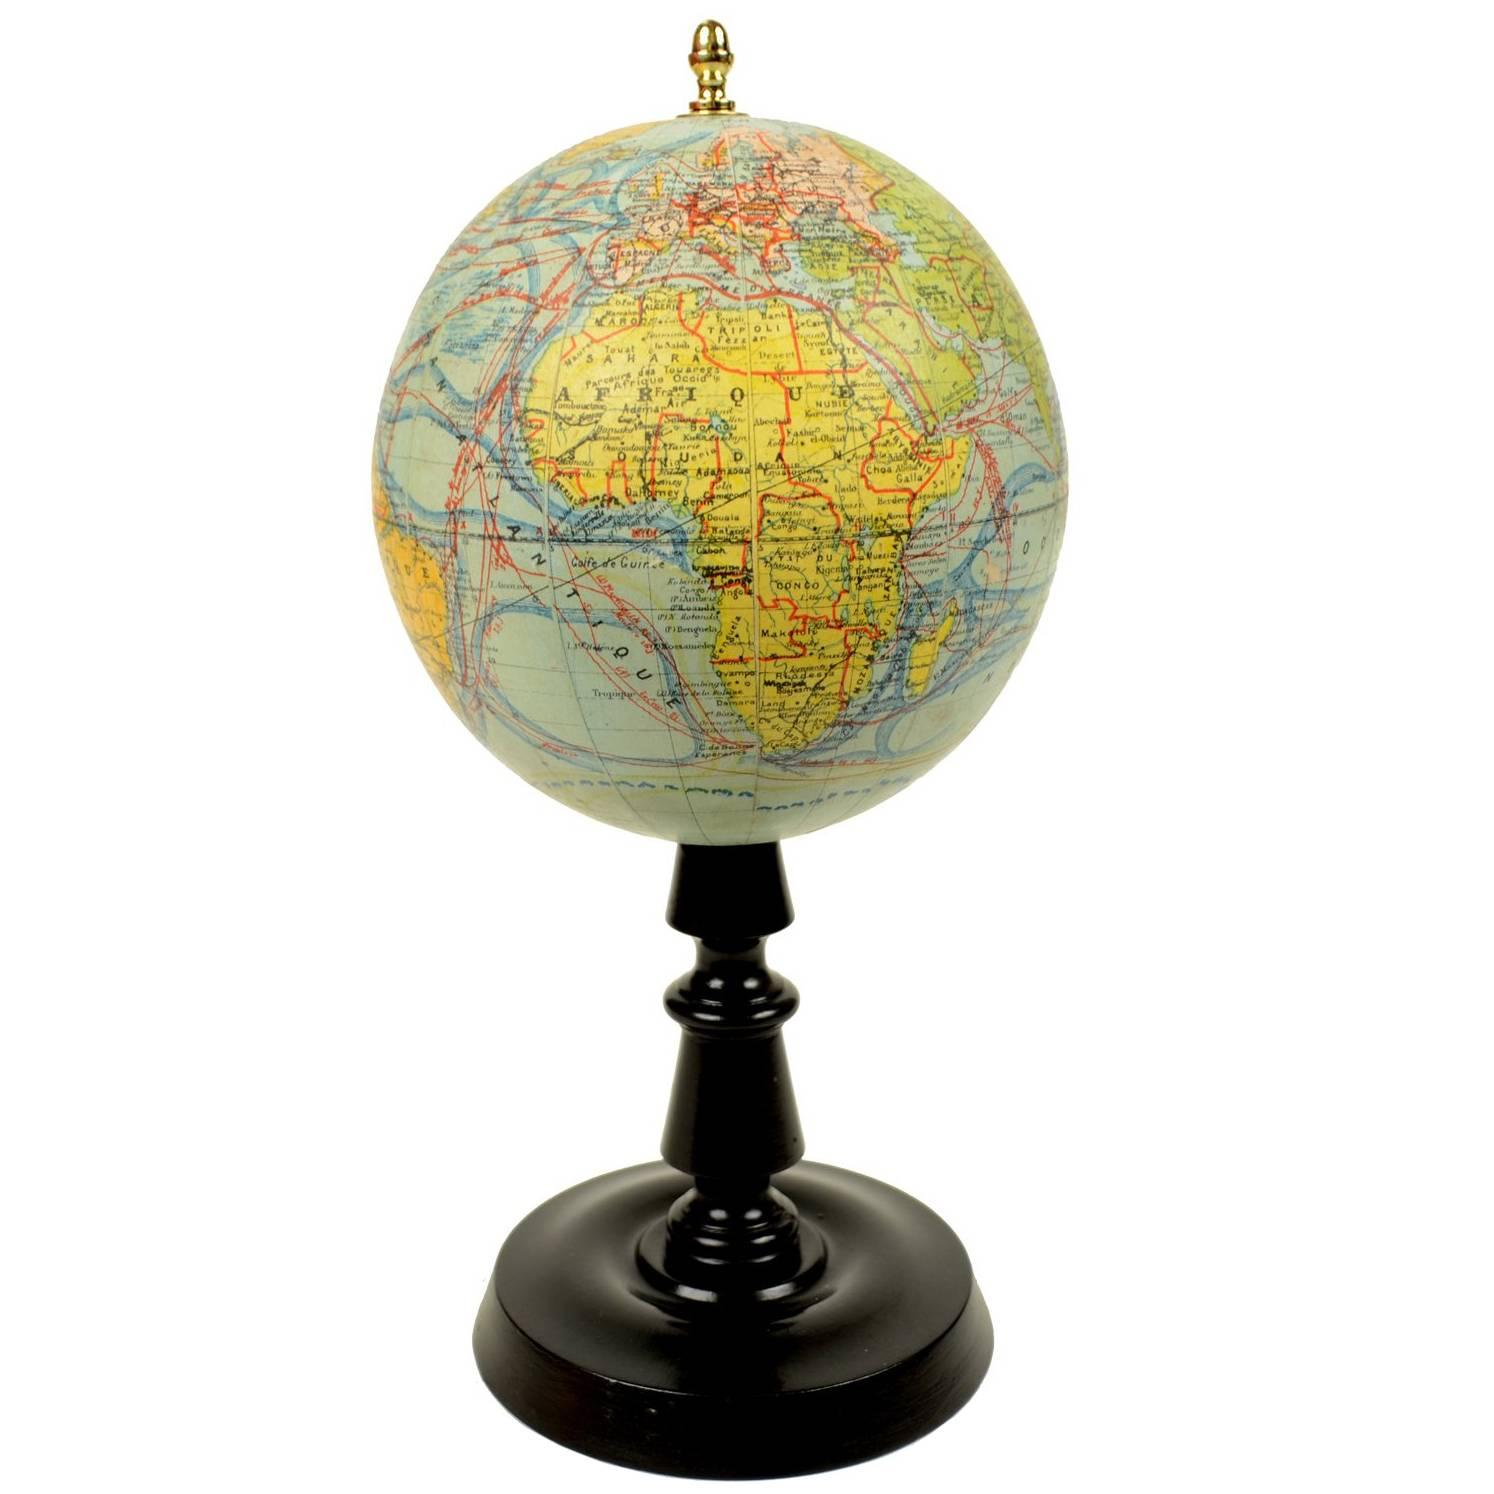 Terrestrial Globe Edited by the French Cartographer J. Forest in the 1930s